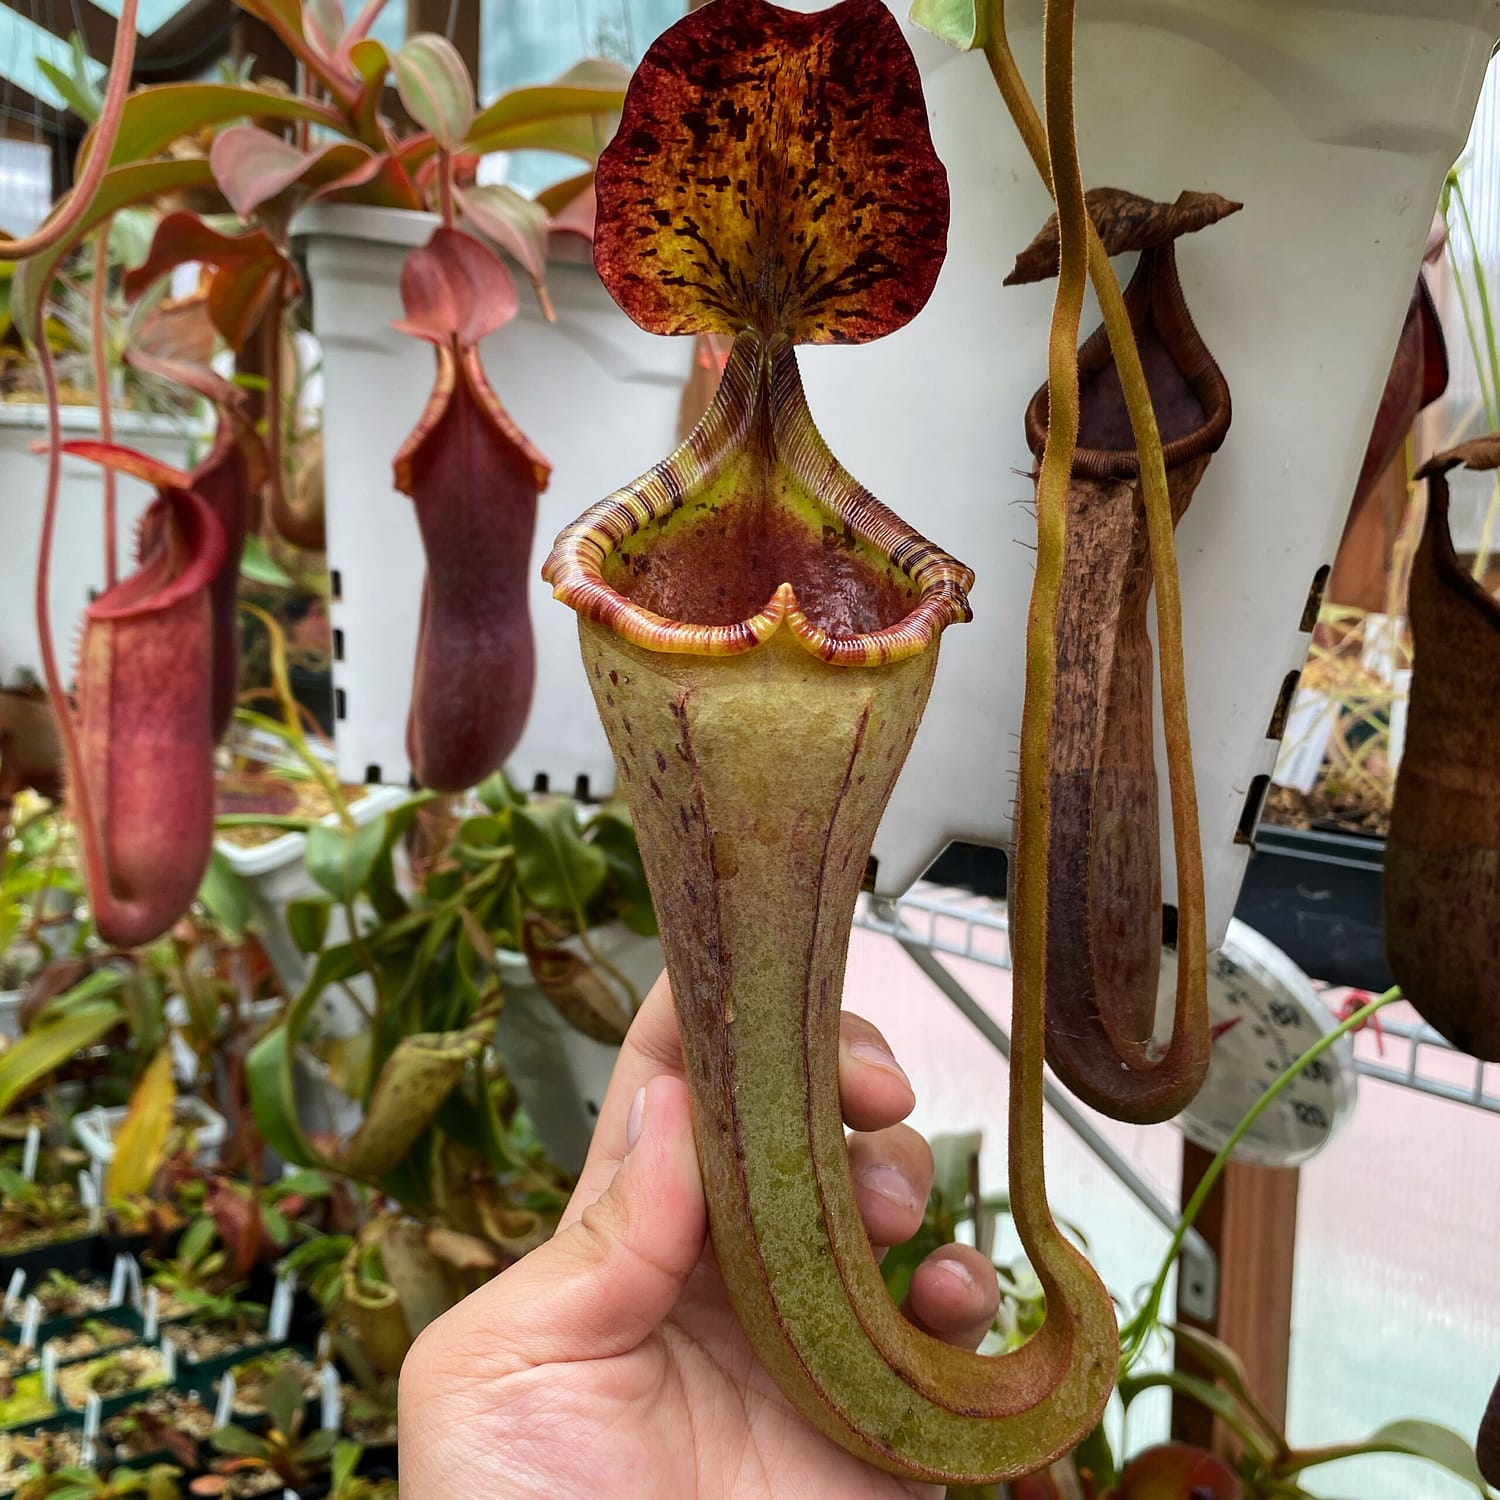 A hand holding a Nepenthes platychila x mollis plant, with other Nepenthes platychila x mollis plants in the background